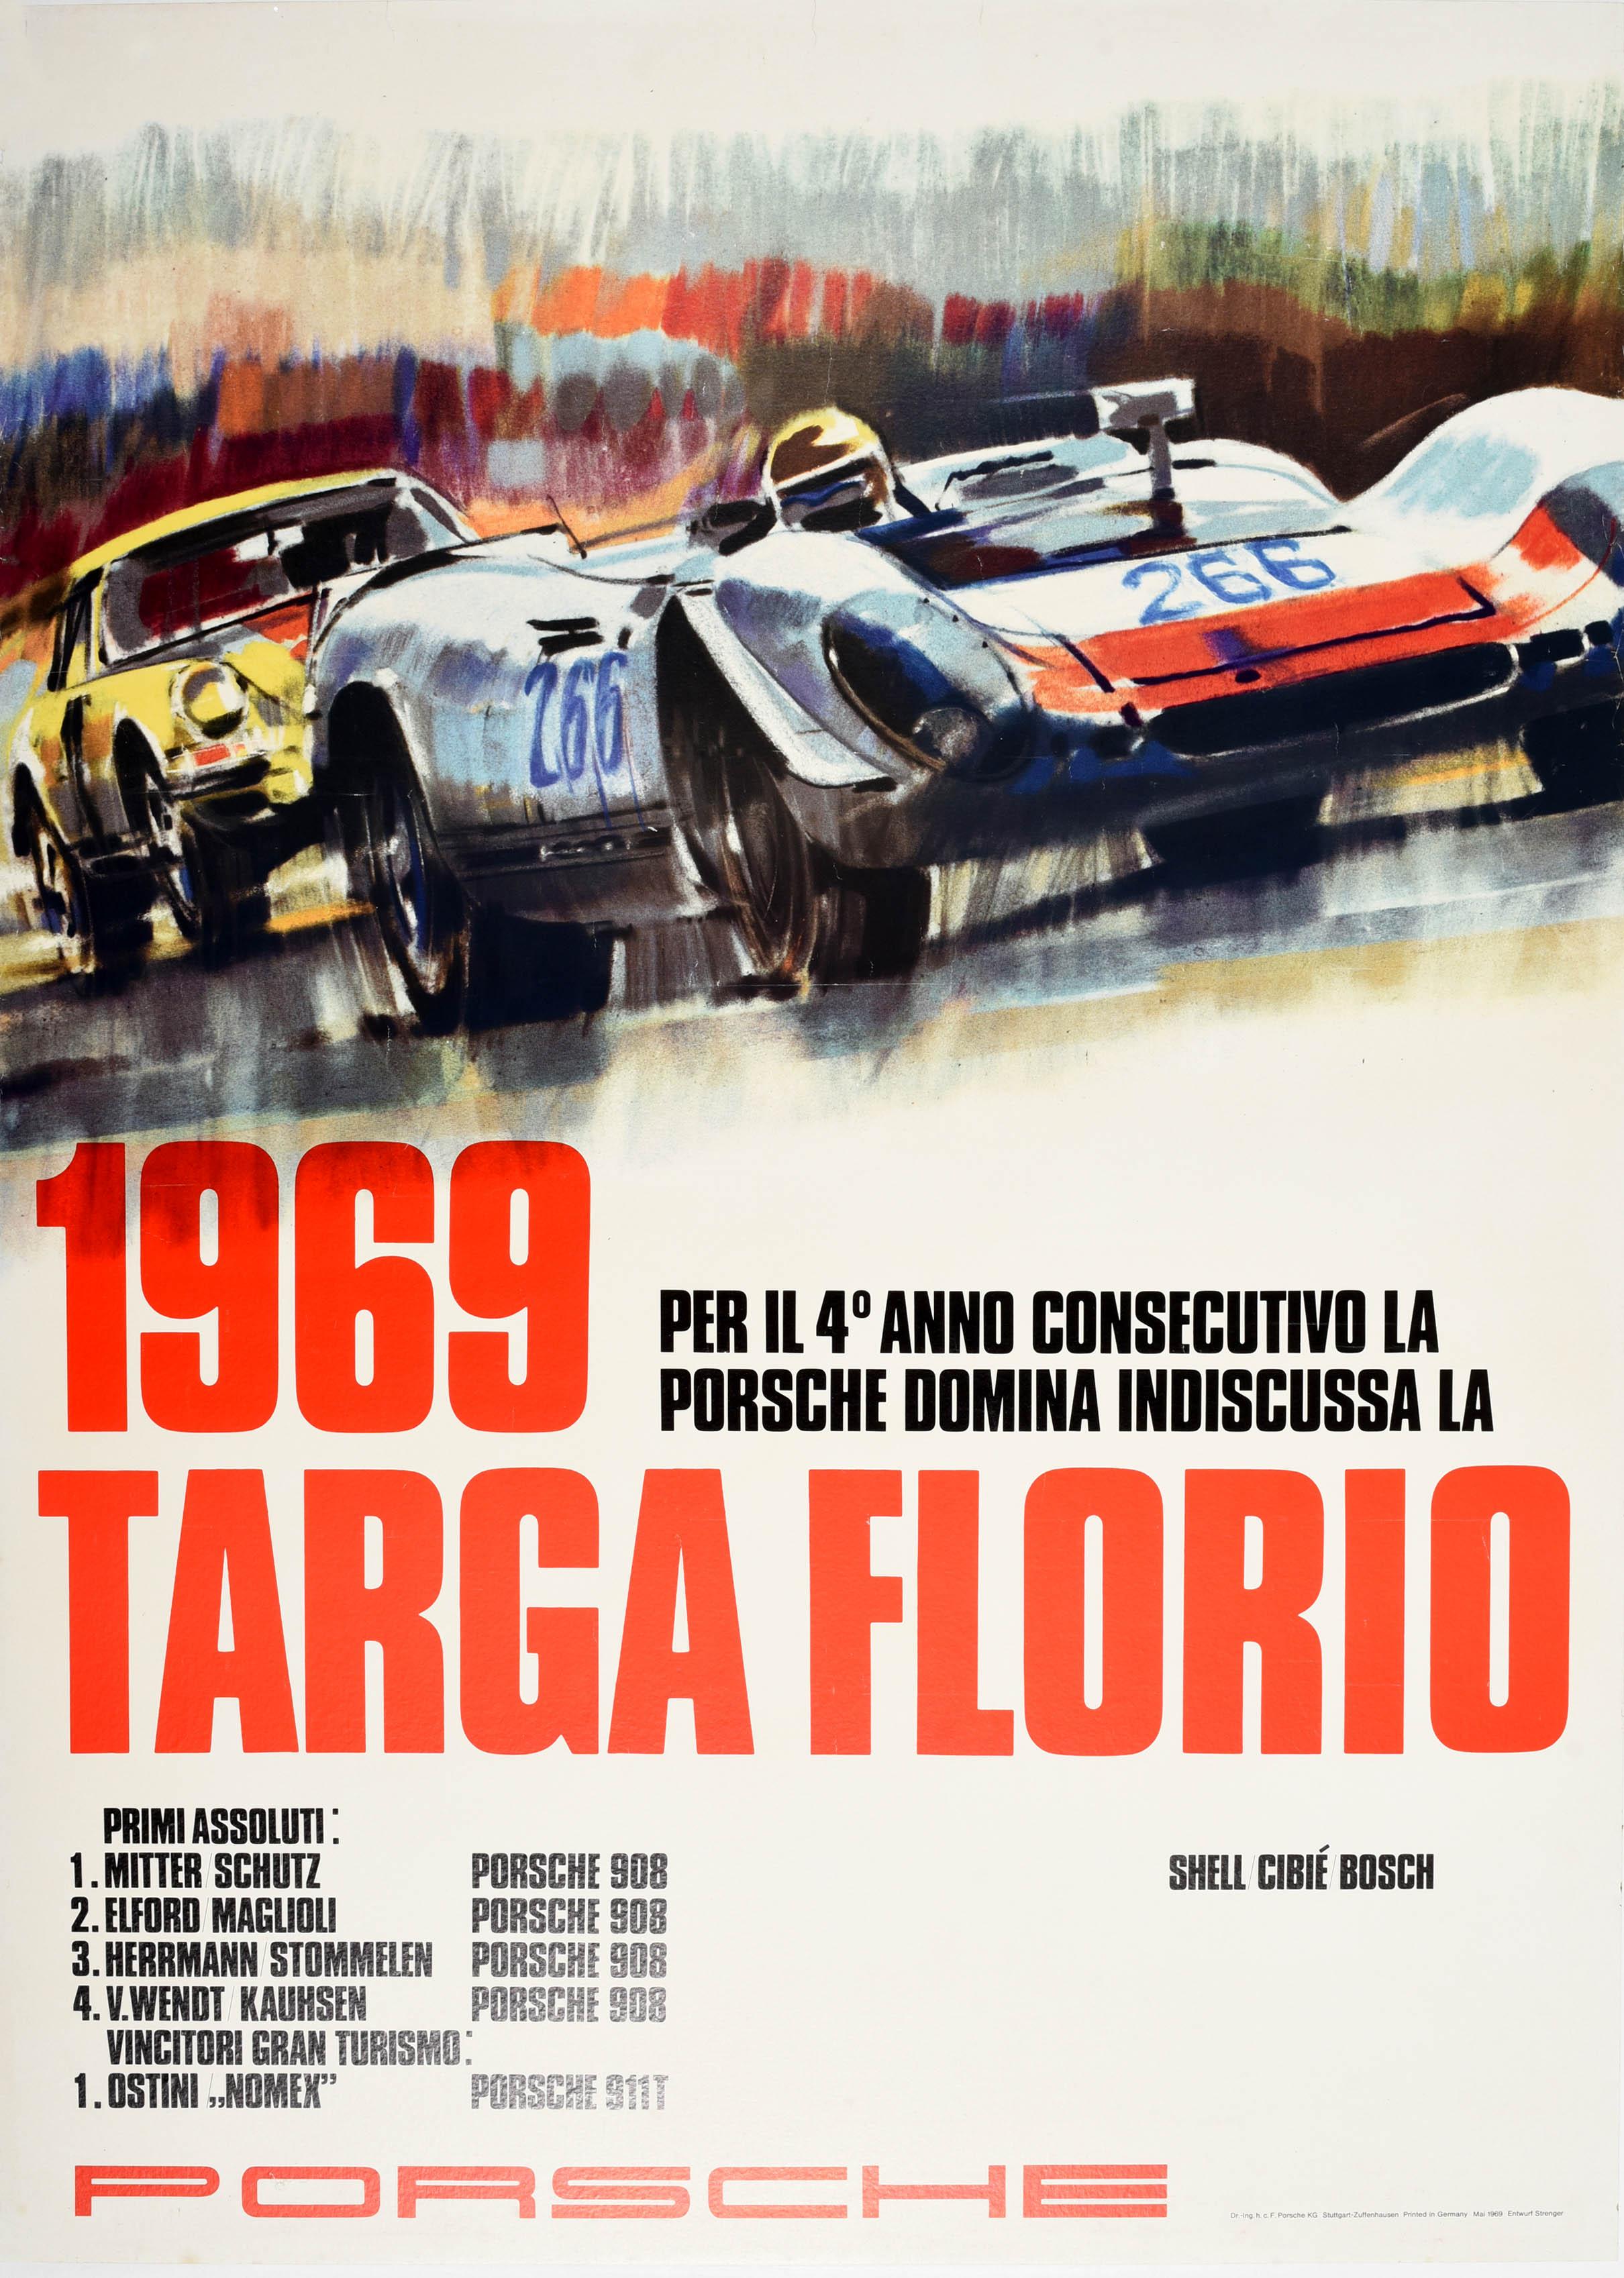 Original vintage motorsport poster issued by Porsche celebrating their victory at the 1969 Targa Florio featuring colourful auto racing artwork depicting cars driving at speed on a track led by a race car numbered 266 above the bold red title